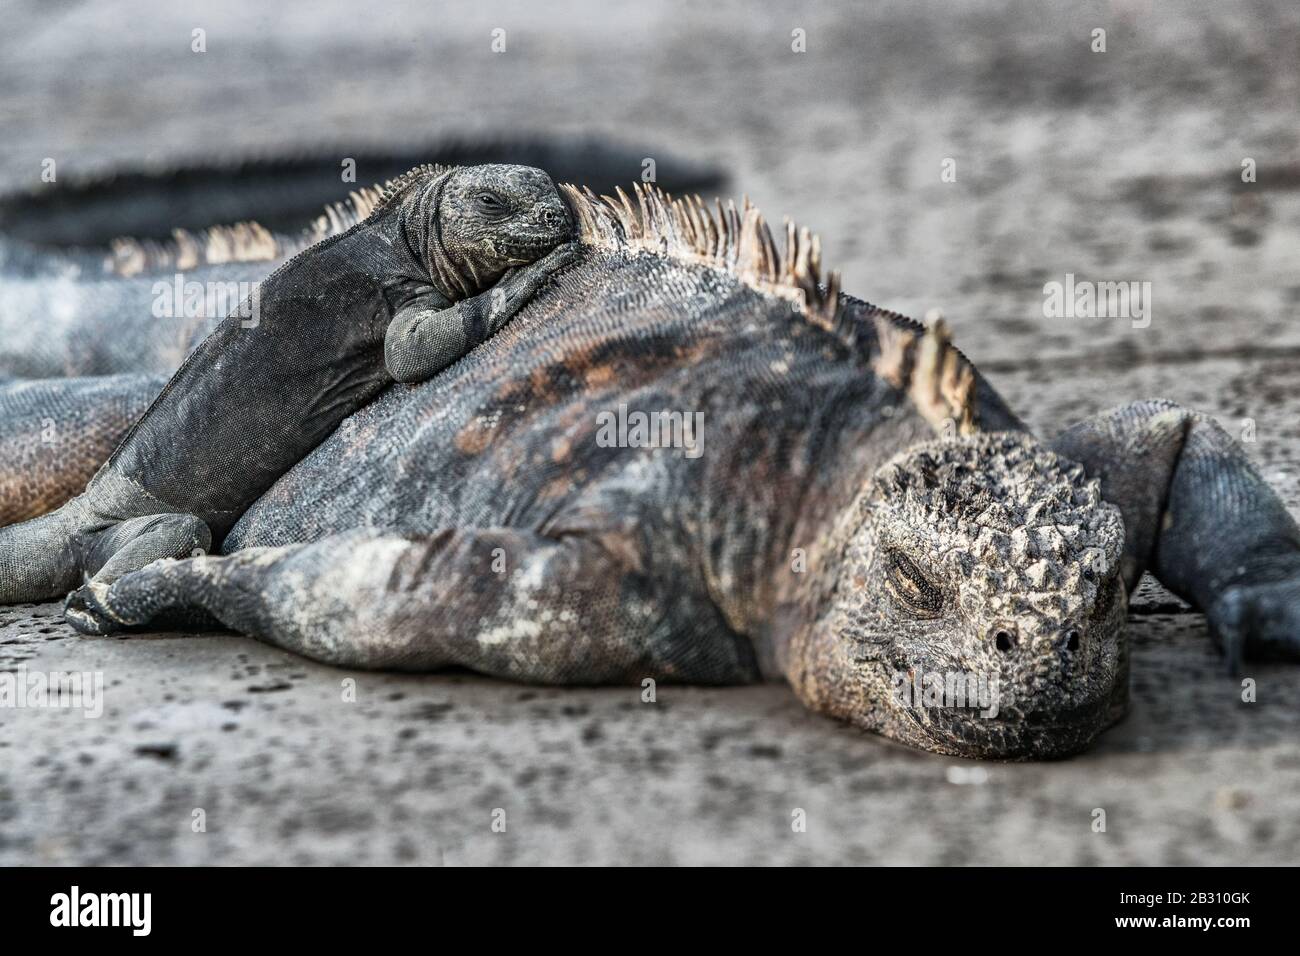 Galapagos Islands animals. Iguanas lying in the sun on rock. Marine iguana is an endemic species in Galapagos Islands. Animals, wildlife and nature of Ecuador. Young and mature iguana. Stock Photo